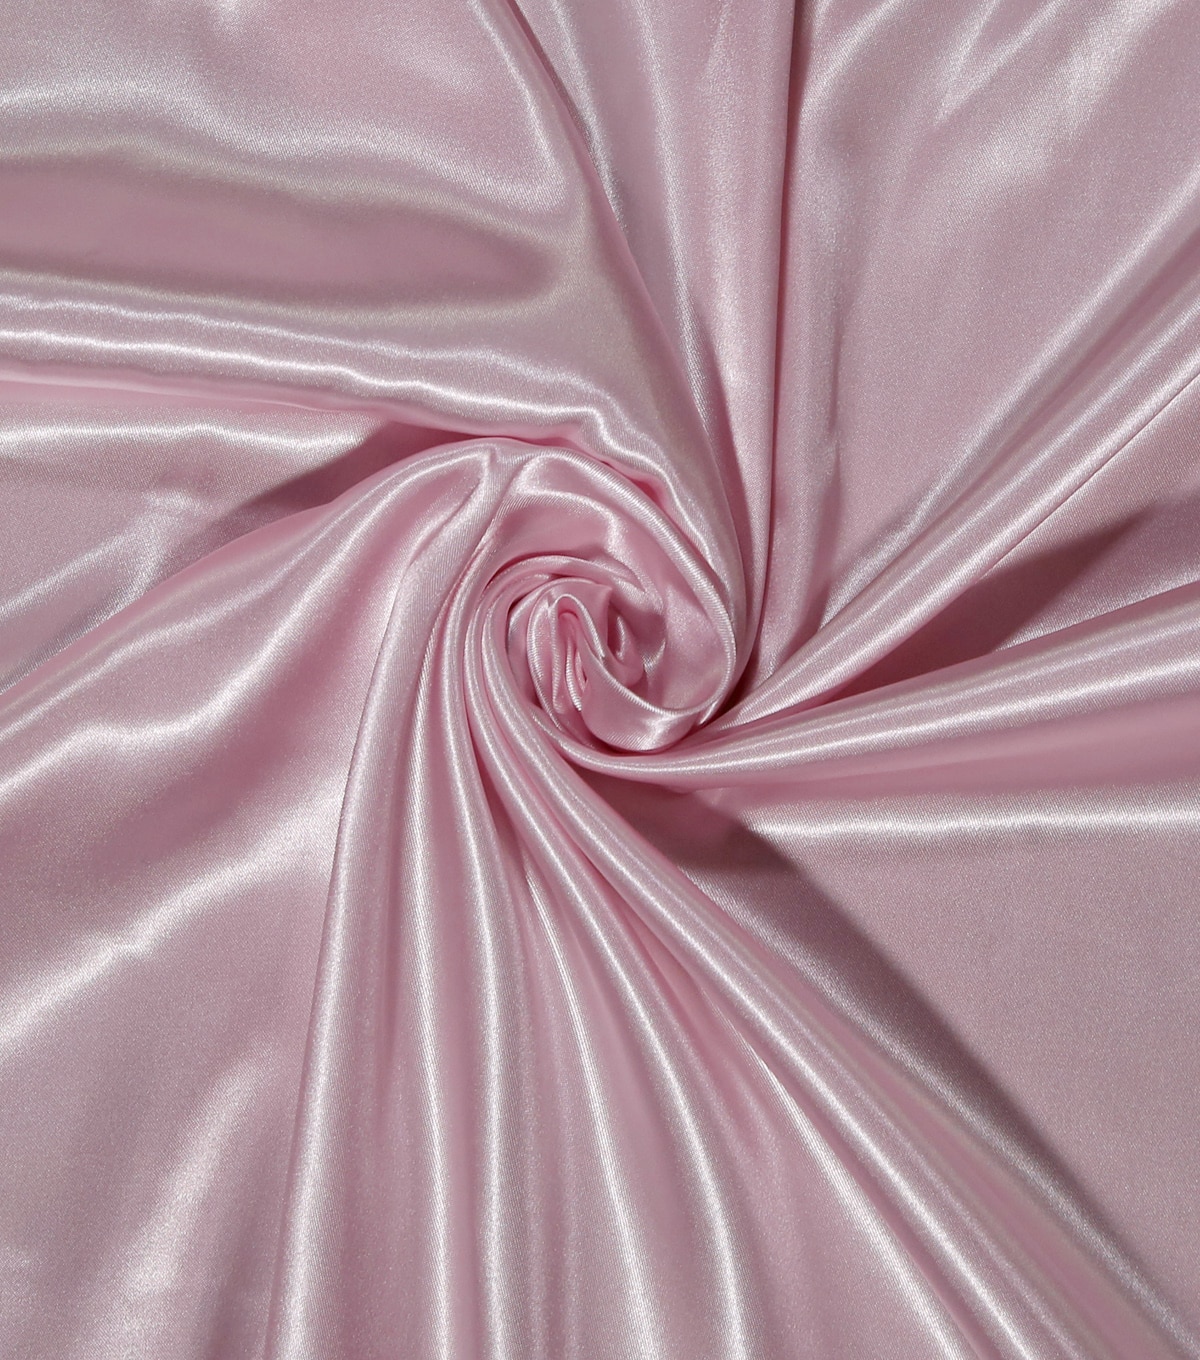 Let's Pretend TM Special Occasion Fabric- Satin Solid Light Pink | JOANN